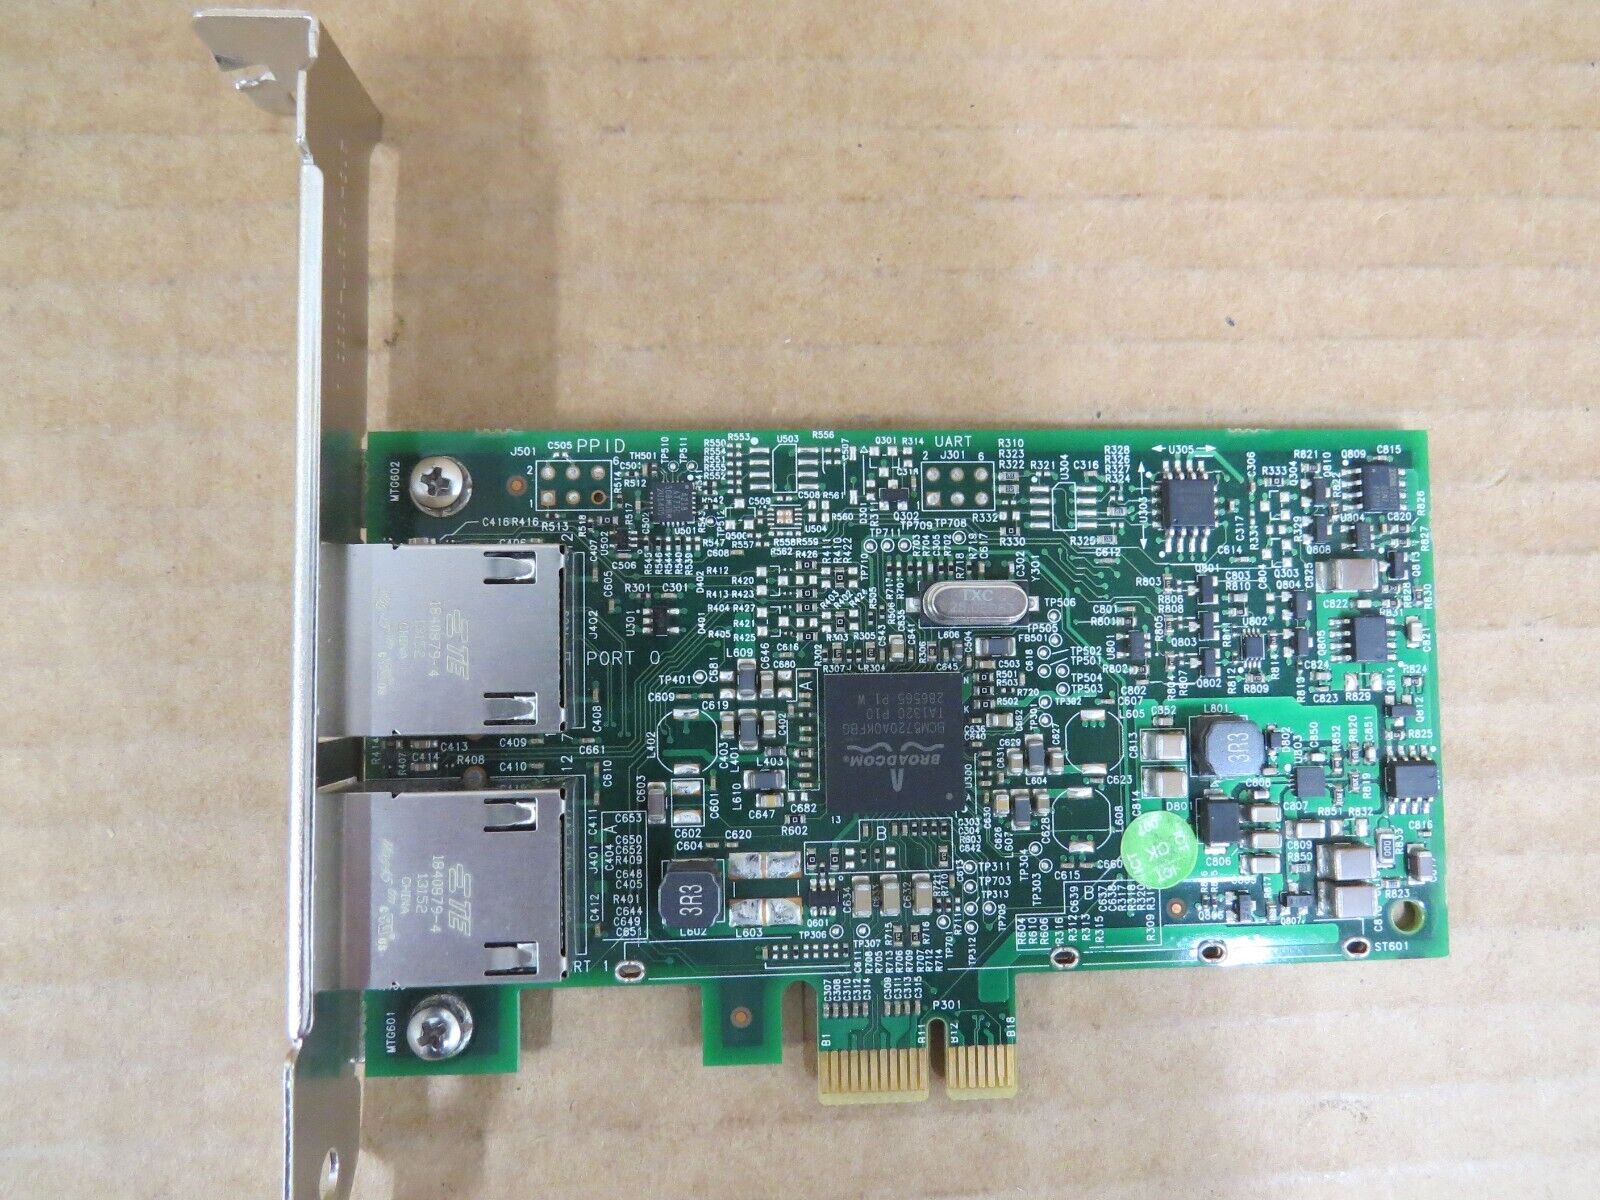 Dell 0FCGN Broadcom 5720 1Gbps 2-Port PCI-E Ethernet Network Adapter Card